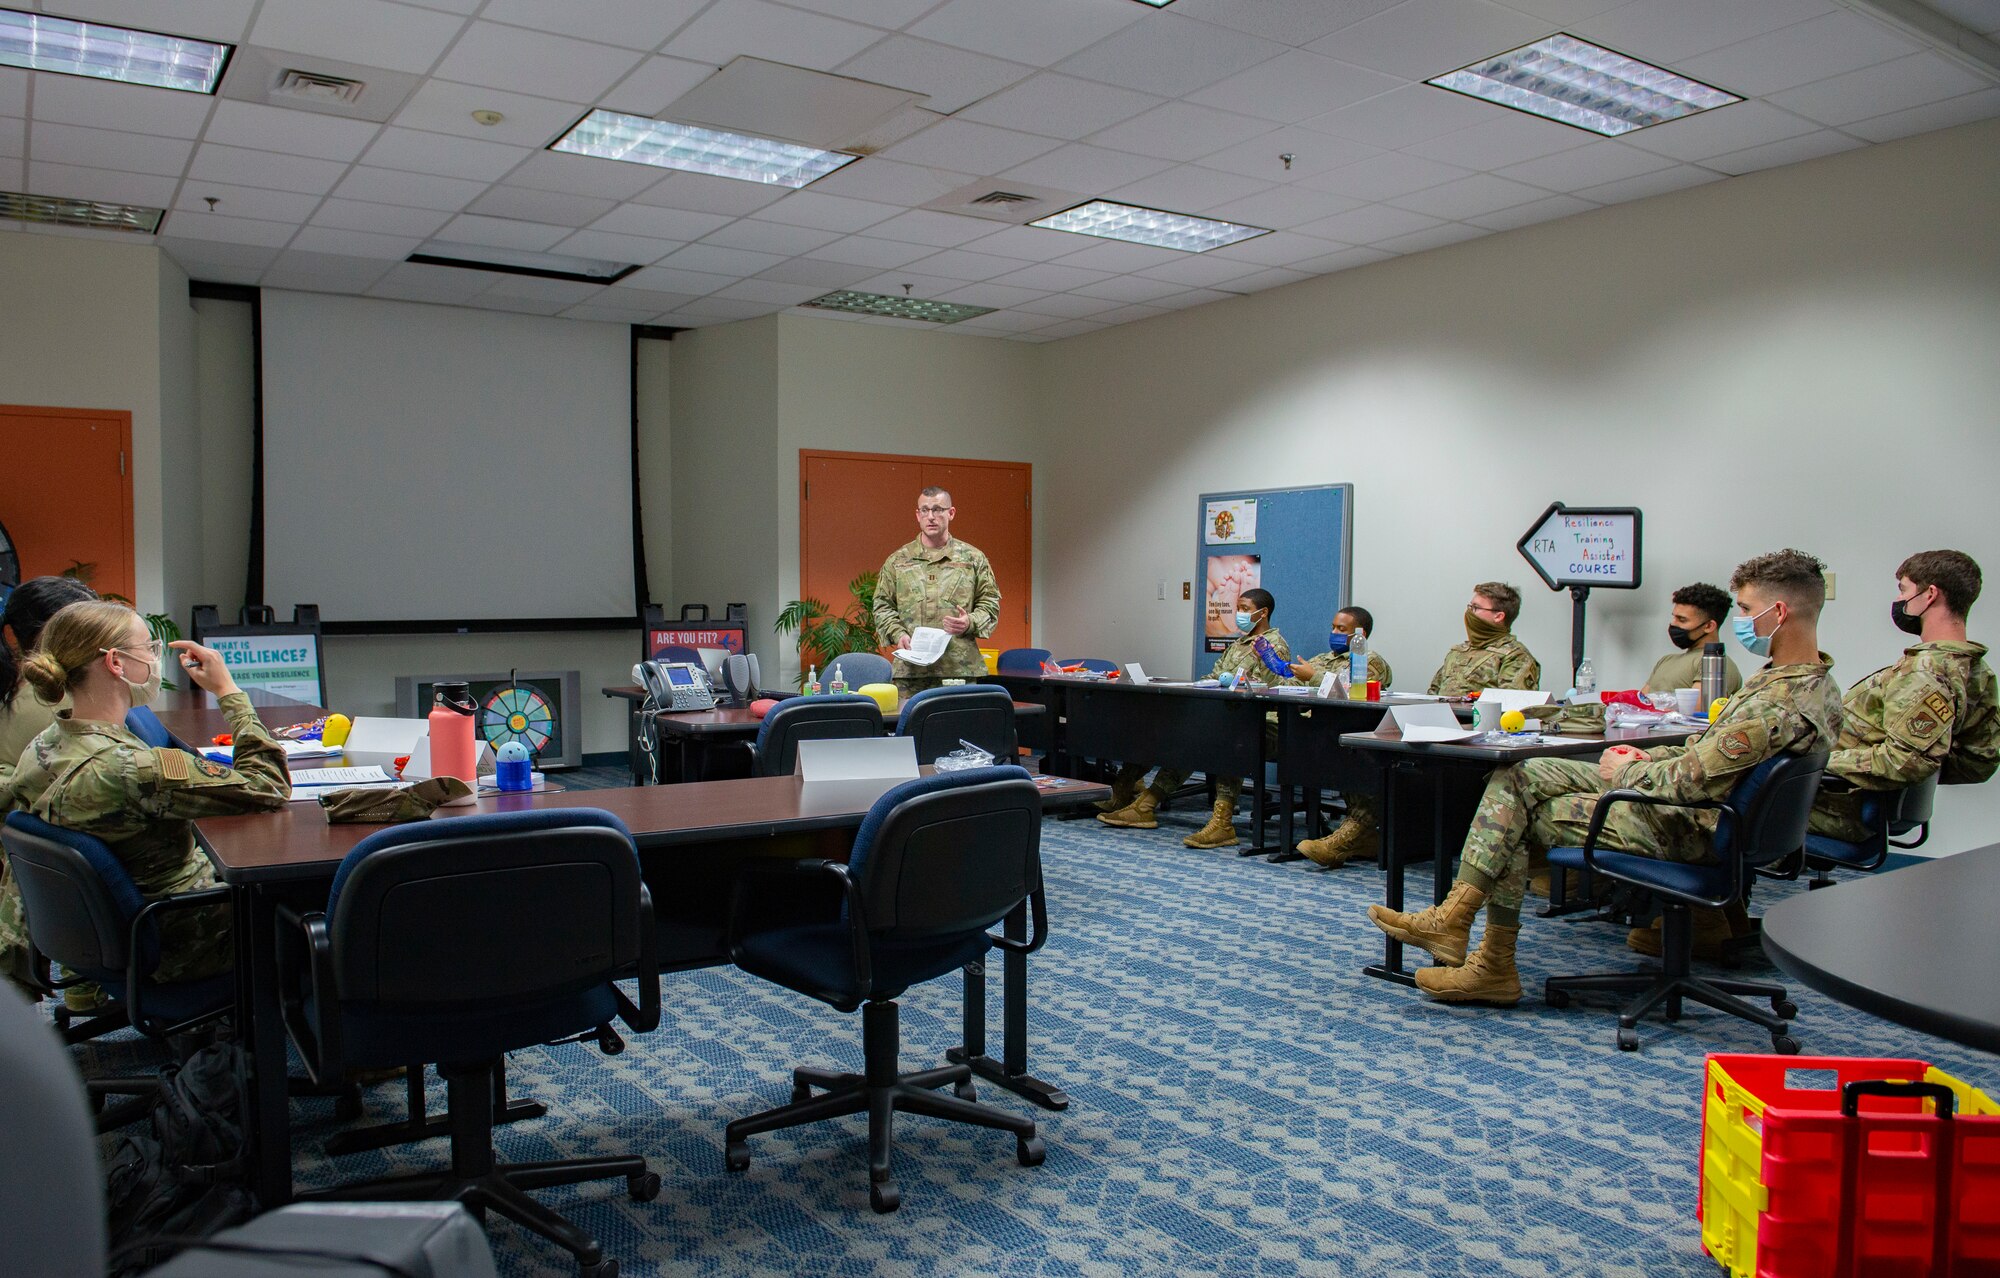 U.S. Air Force Capt. Kevin Malina, a licensed clinical psychologist and a sleep optimization course instructor, teaches First Term Airman’s Center students about healthy sleeping habits Jan. 11, 2022, at Andersen Air Force Base, Guam. The sleep optimization course offers an overview of the biopsychosocial aspects of sleep and understanding of key physical functions that contribute to promotion of healthy sleep patterns. (U.S. Air Force Photo by Senior Airman Helena Owens)